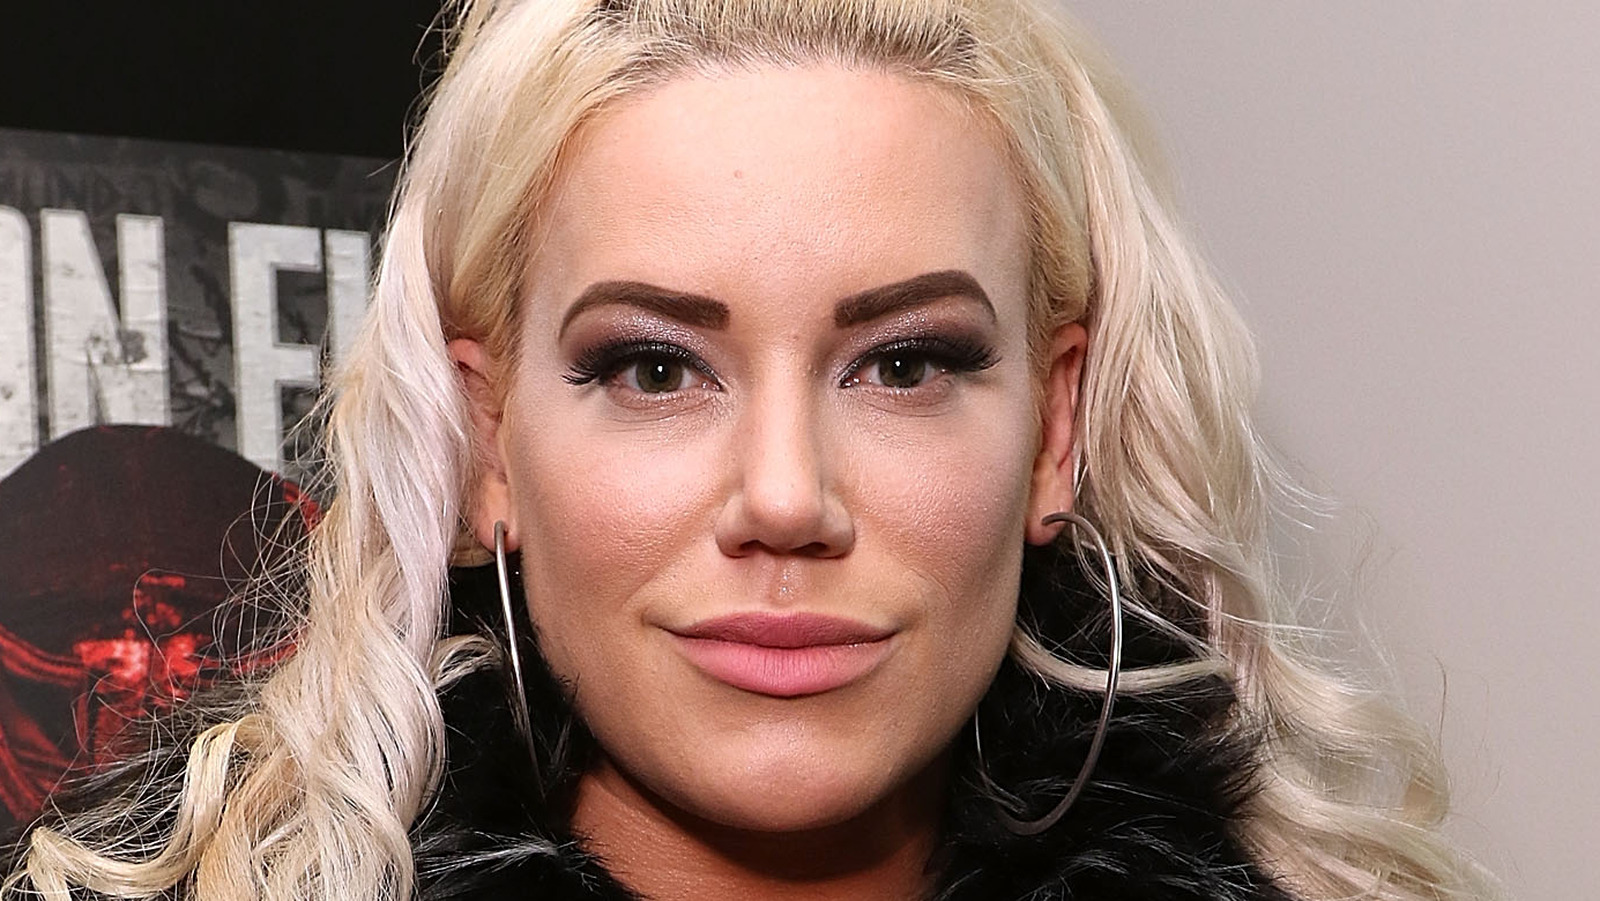 Taya Valkyrie Officially Done With Impact Wrestling